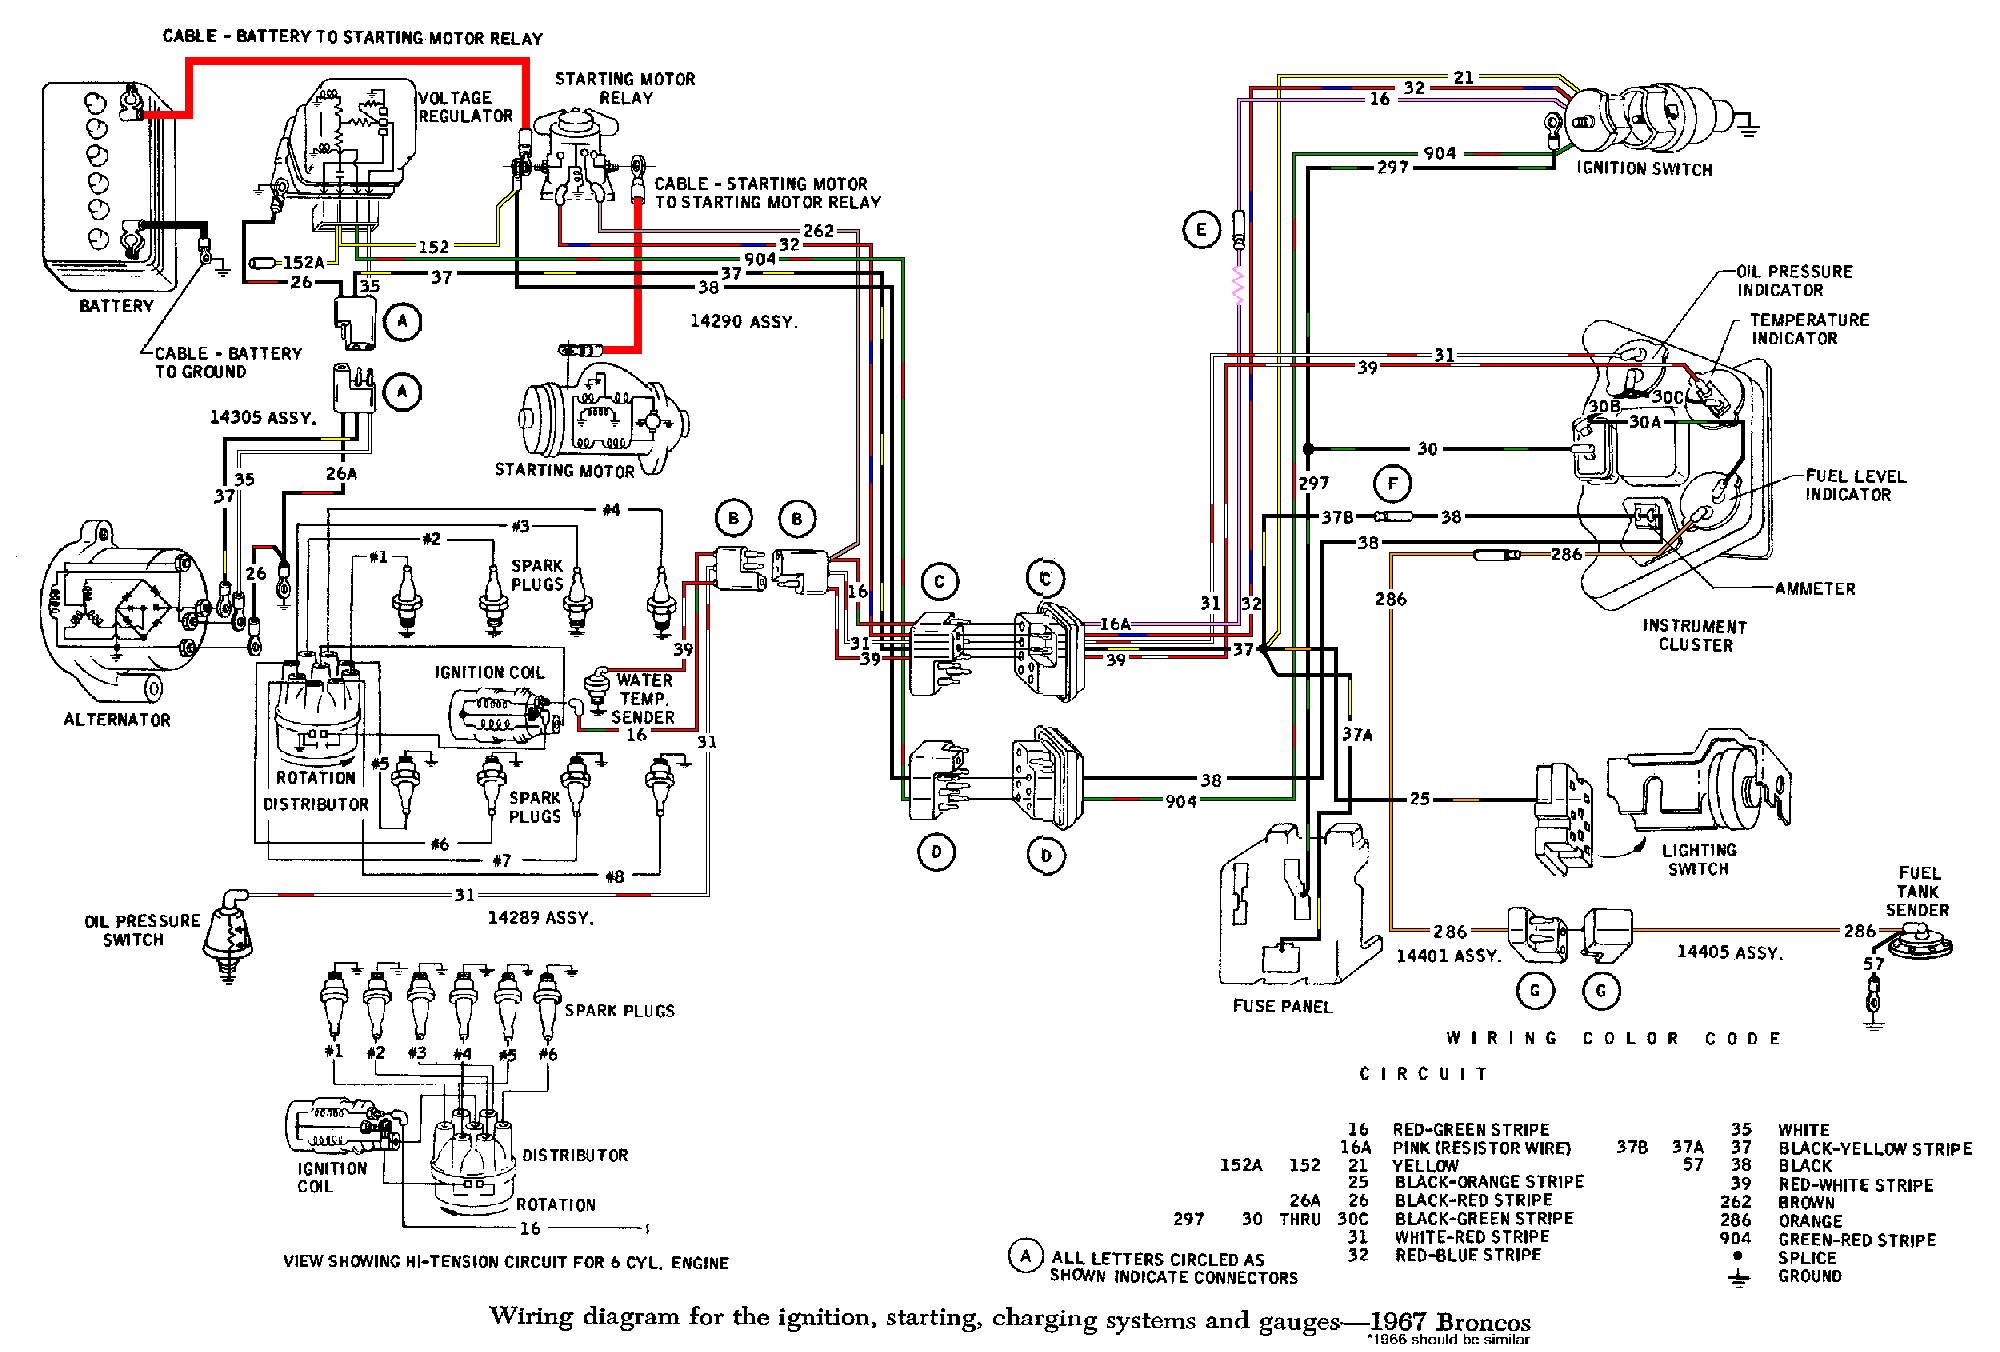 1996 Ford F250 Tail Light Wiring Diagram from seabiscuit68.tripod.com